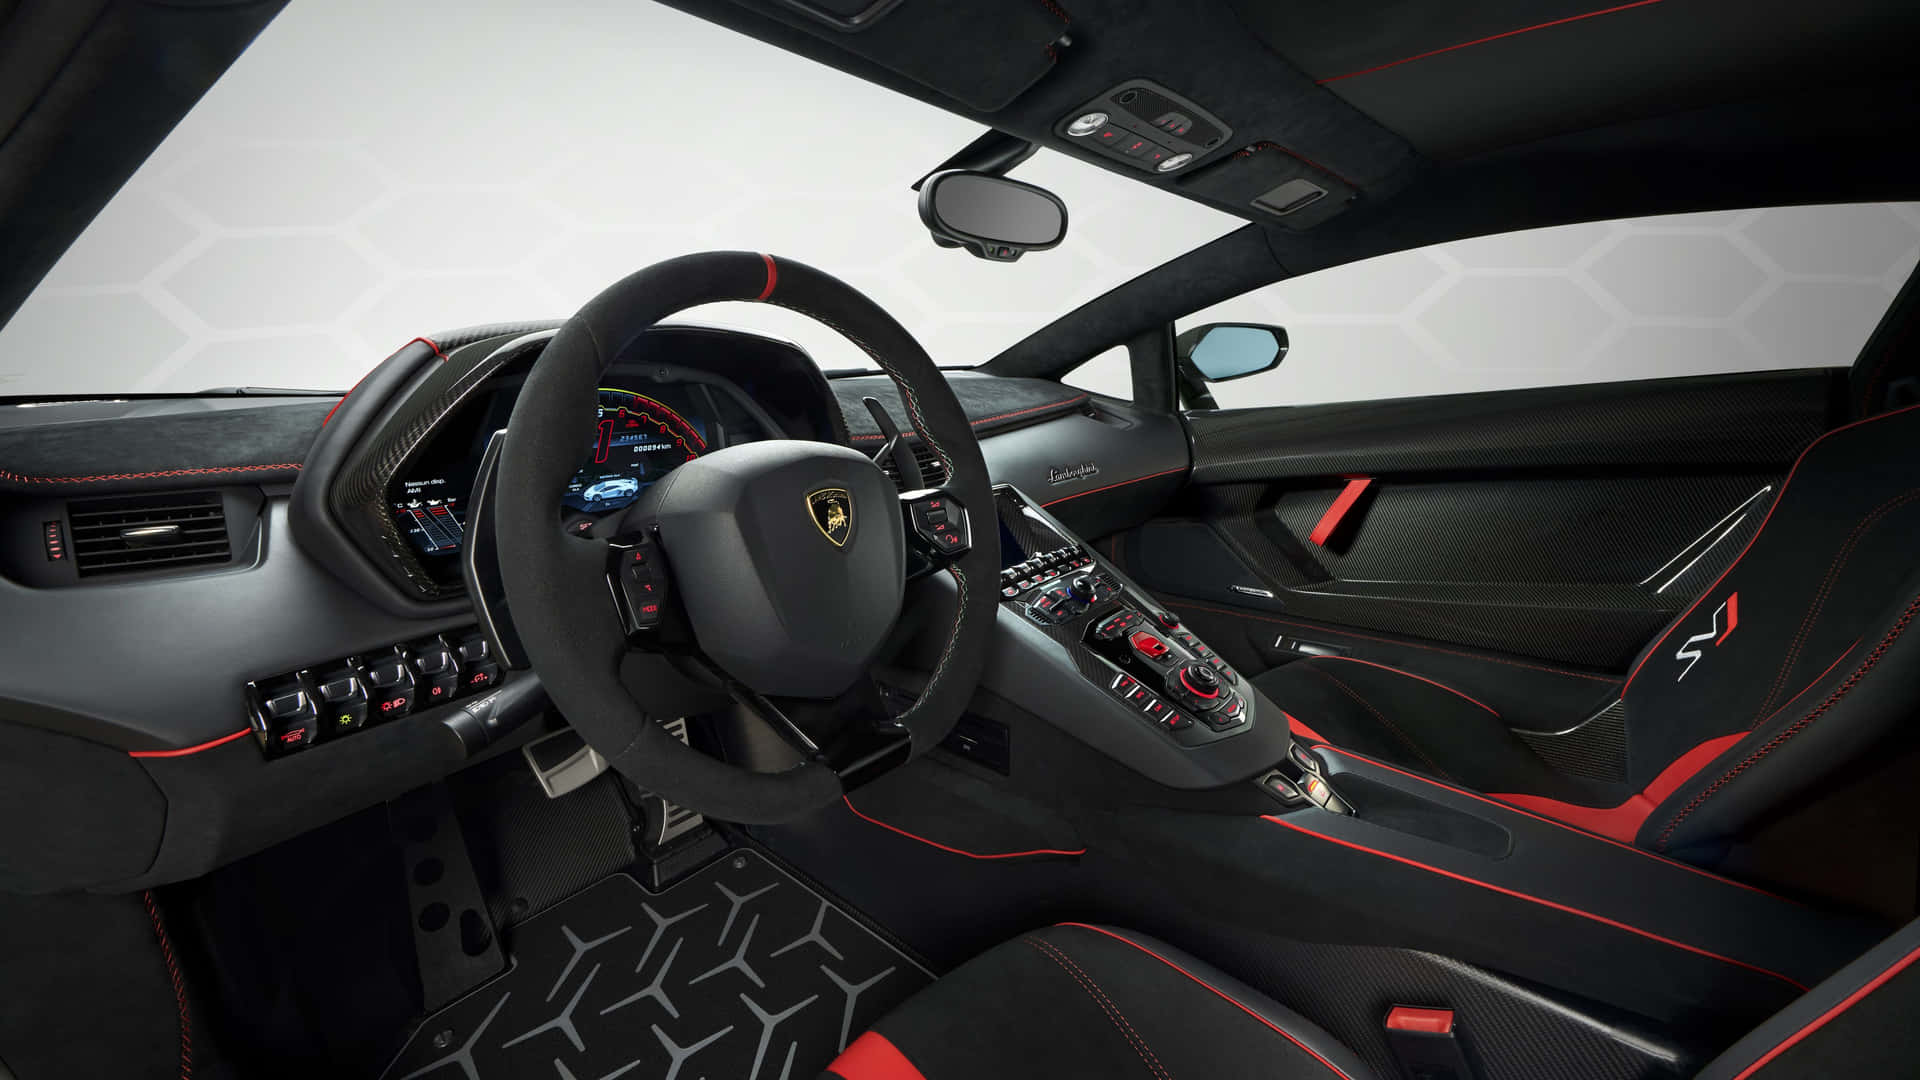 The Interior Of A Sports Car With Red And Black Interior